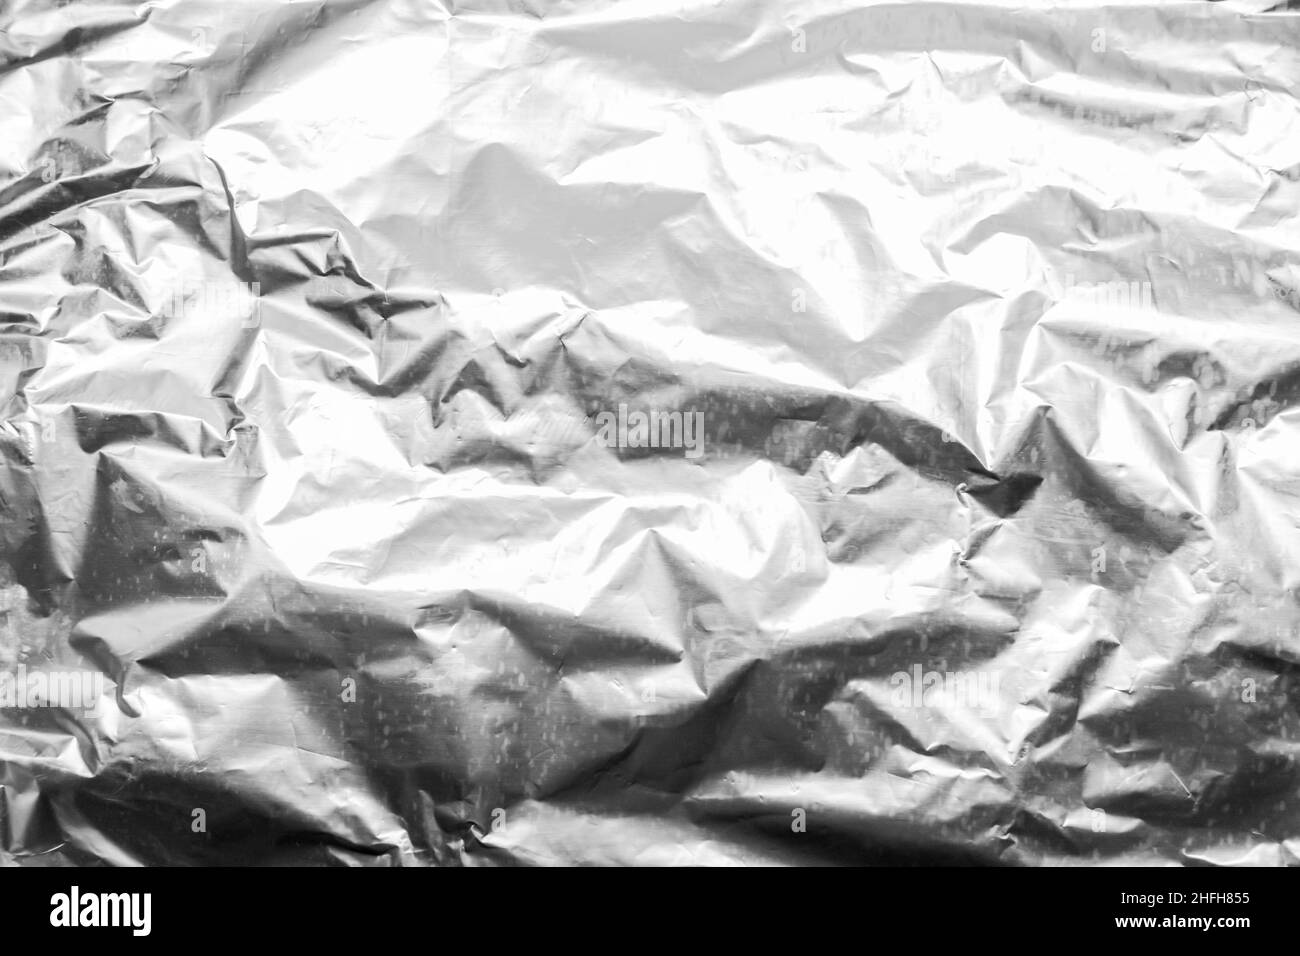 Foil crumpled texture wrinkled silver material abstract pattern surface background. Stock Photo